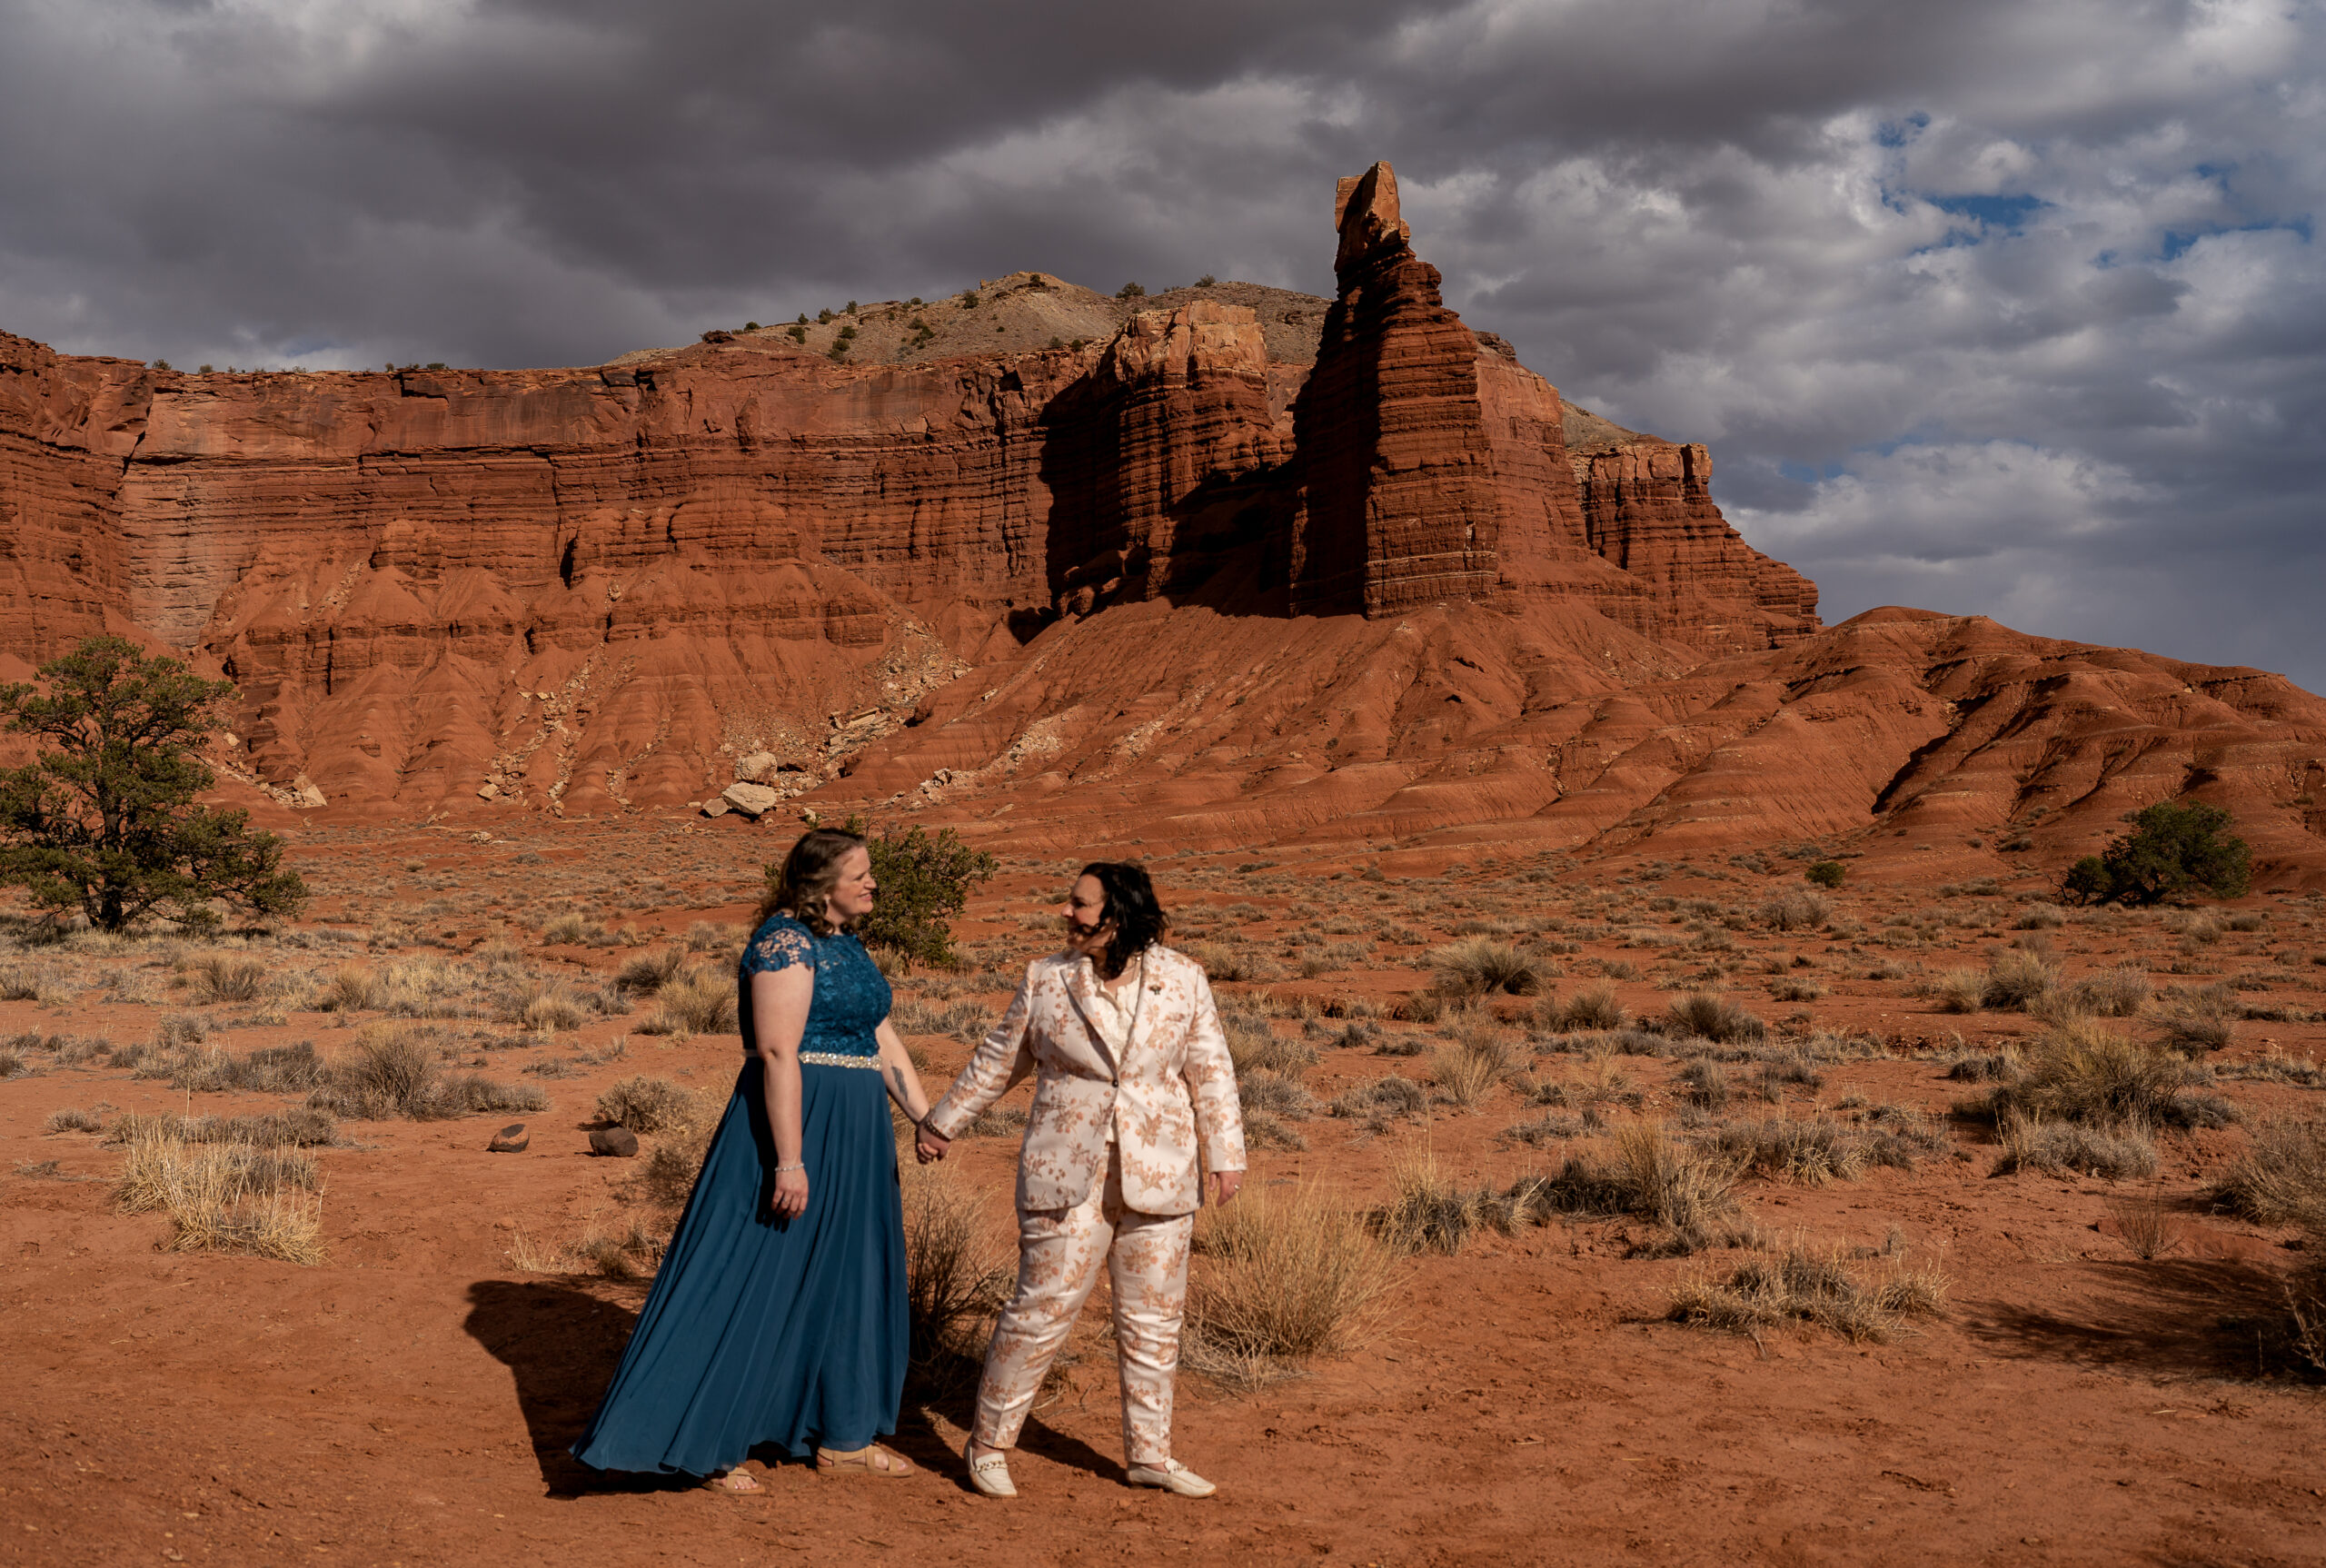 One bride is leading the other bride across the photo while holding hands with red rock walls and towers behind them in Capitol Reef National Park in Utah.